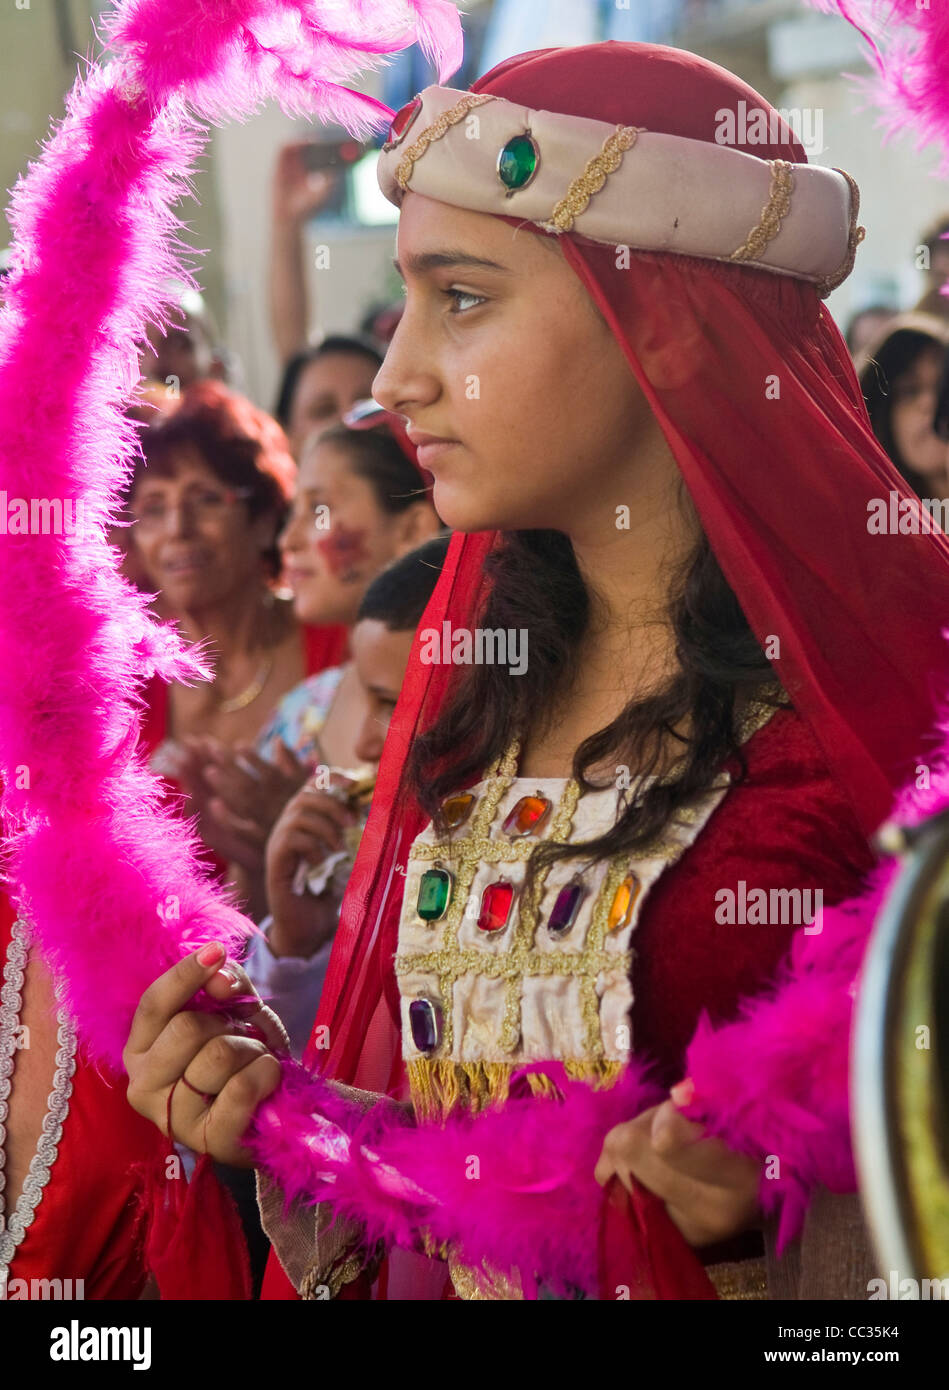 Druze woman participates in Isfiya annual festival Stock Photo